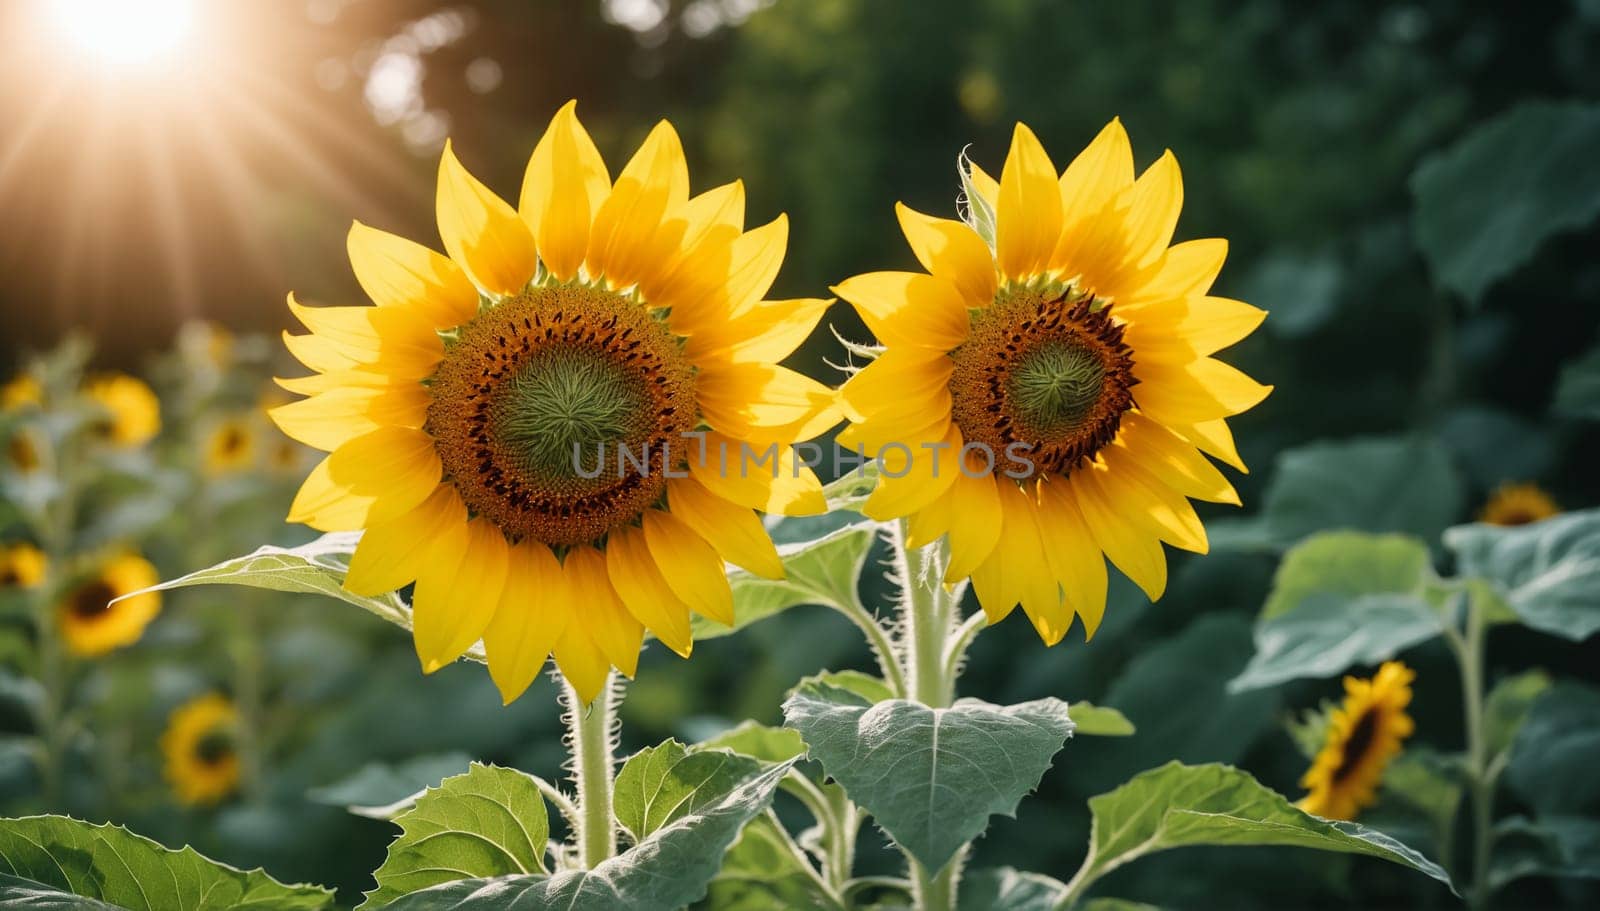 Sunflowers blooming in the field. Sunflower natural background.